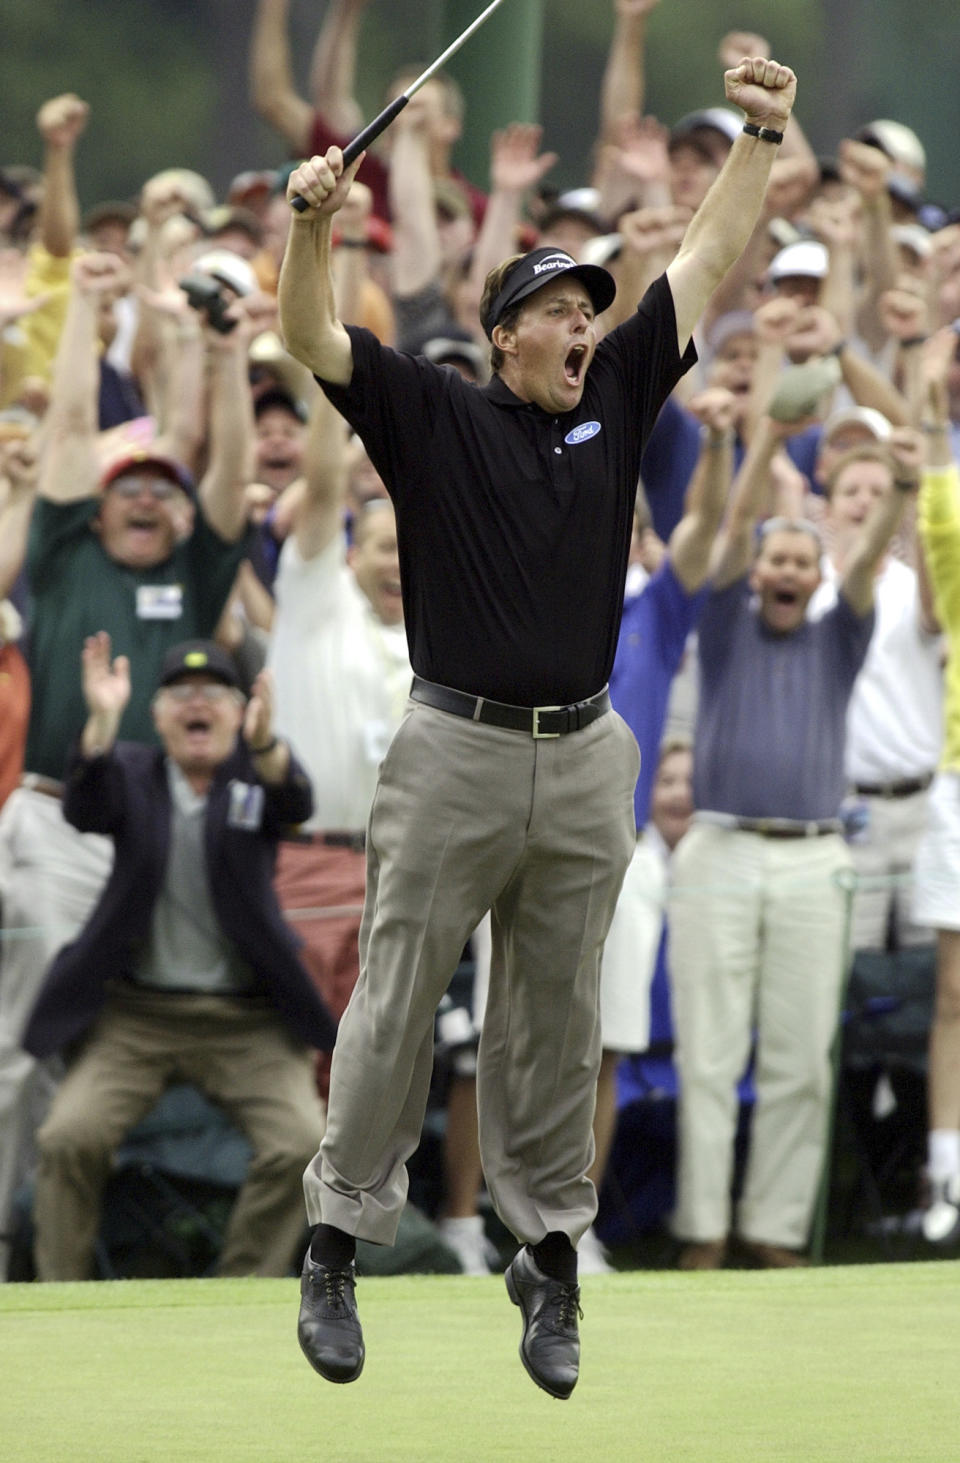 FILE - This photo by Associated Press photographer Elise Amendola shows Phil Mickelson celebrating after winning the Masters golf tournament with a nine-under-par at the Augusta National Golf Club in Augusta, Ga., Sunday, April 11, 2004. Amendola, who recently retired from the AP, died Thursday, May 11, 2023, at her home in North Andover, Mass., after a 13-year battle with ovarian cancer. She was 70. (AP Photo/Elise Amendola, File)